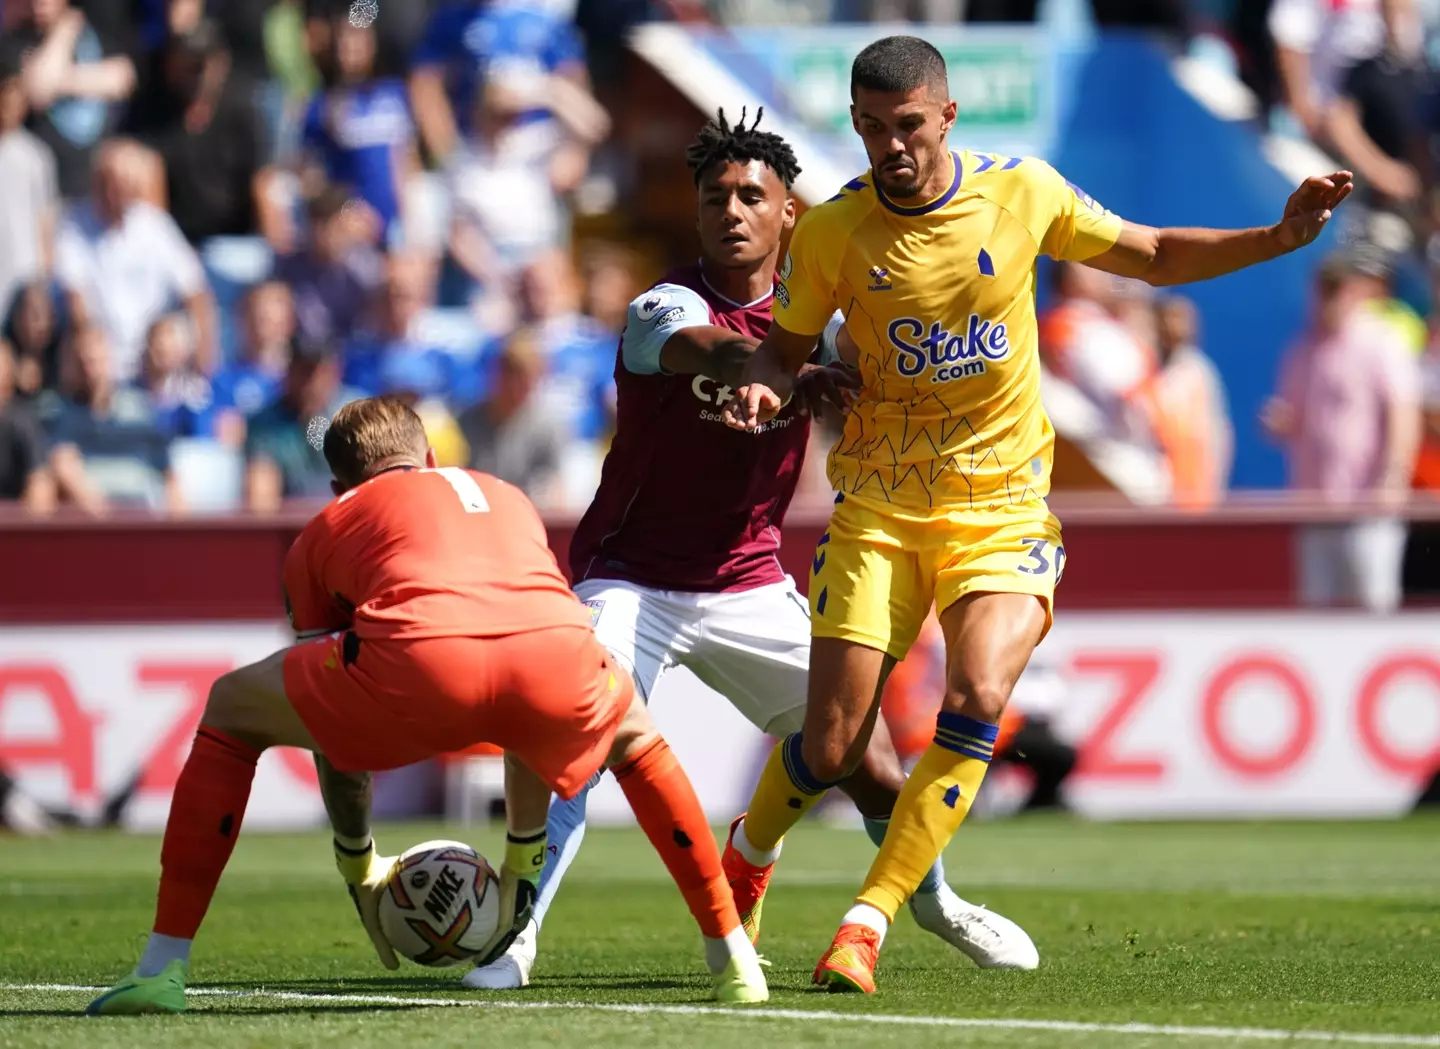 Coady in action for Everton against Aston Villa. (Image